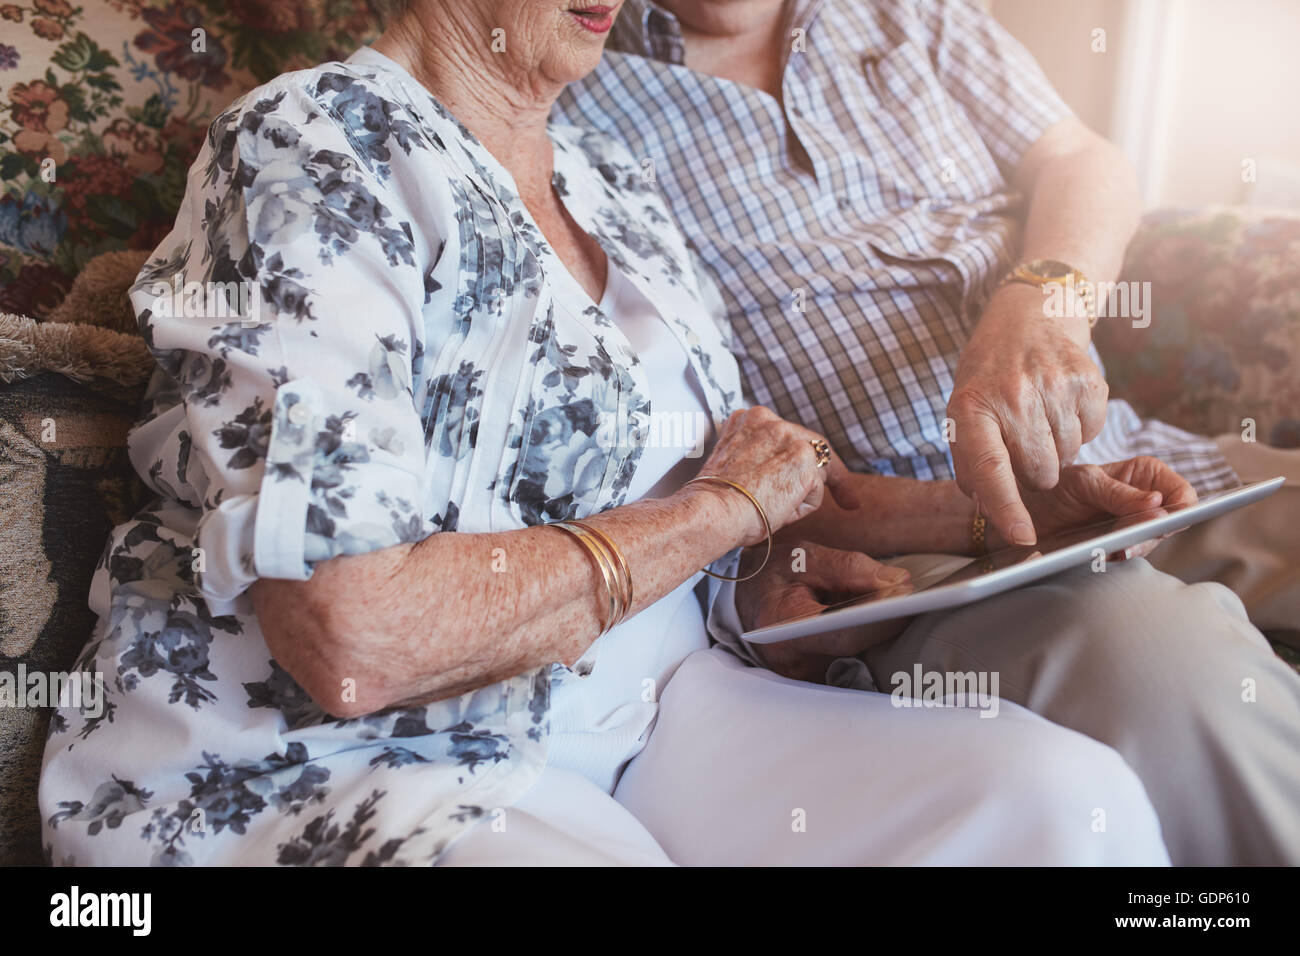 Cropped shot of senior couple sitting together using touch screen computer. Focus on hands of elderly couple and digital tablet. Stock Photo